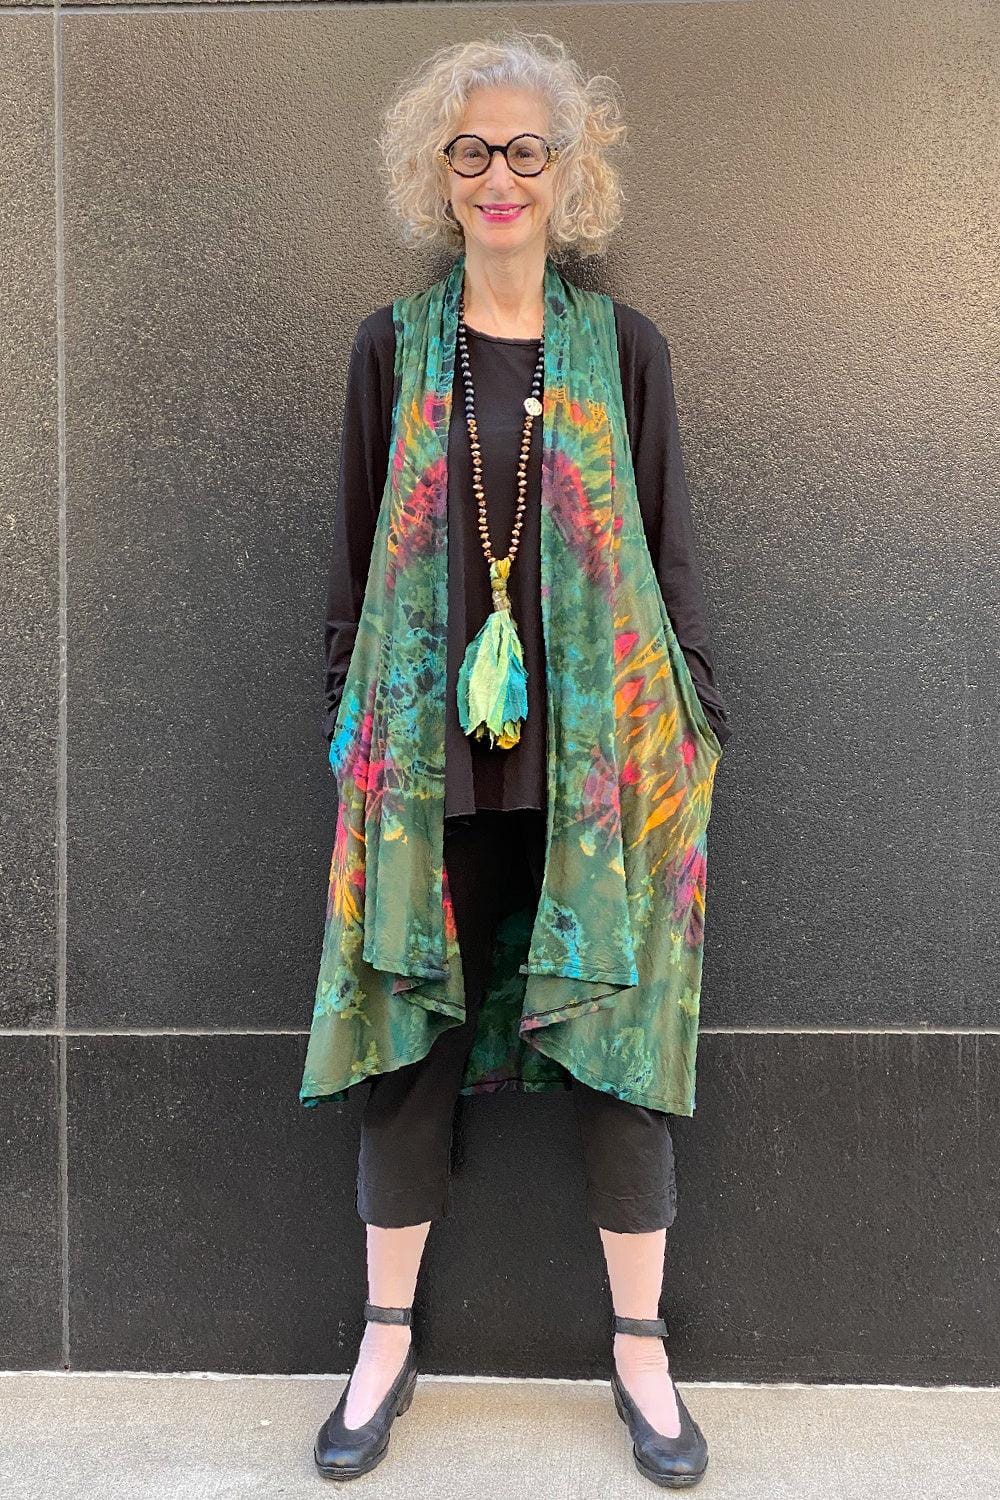 Tie Dye vest in greens and spashes of color worn with a long statement necklace with green fabric.